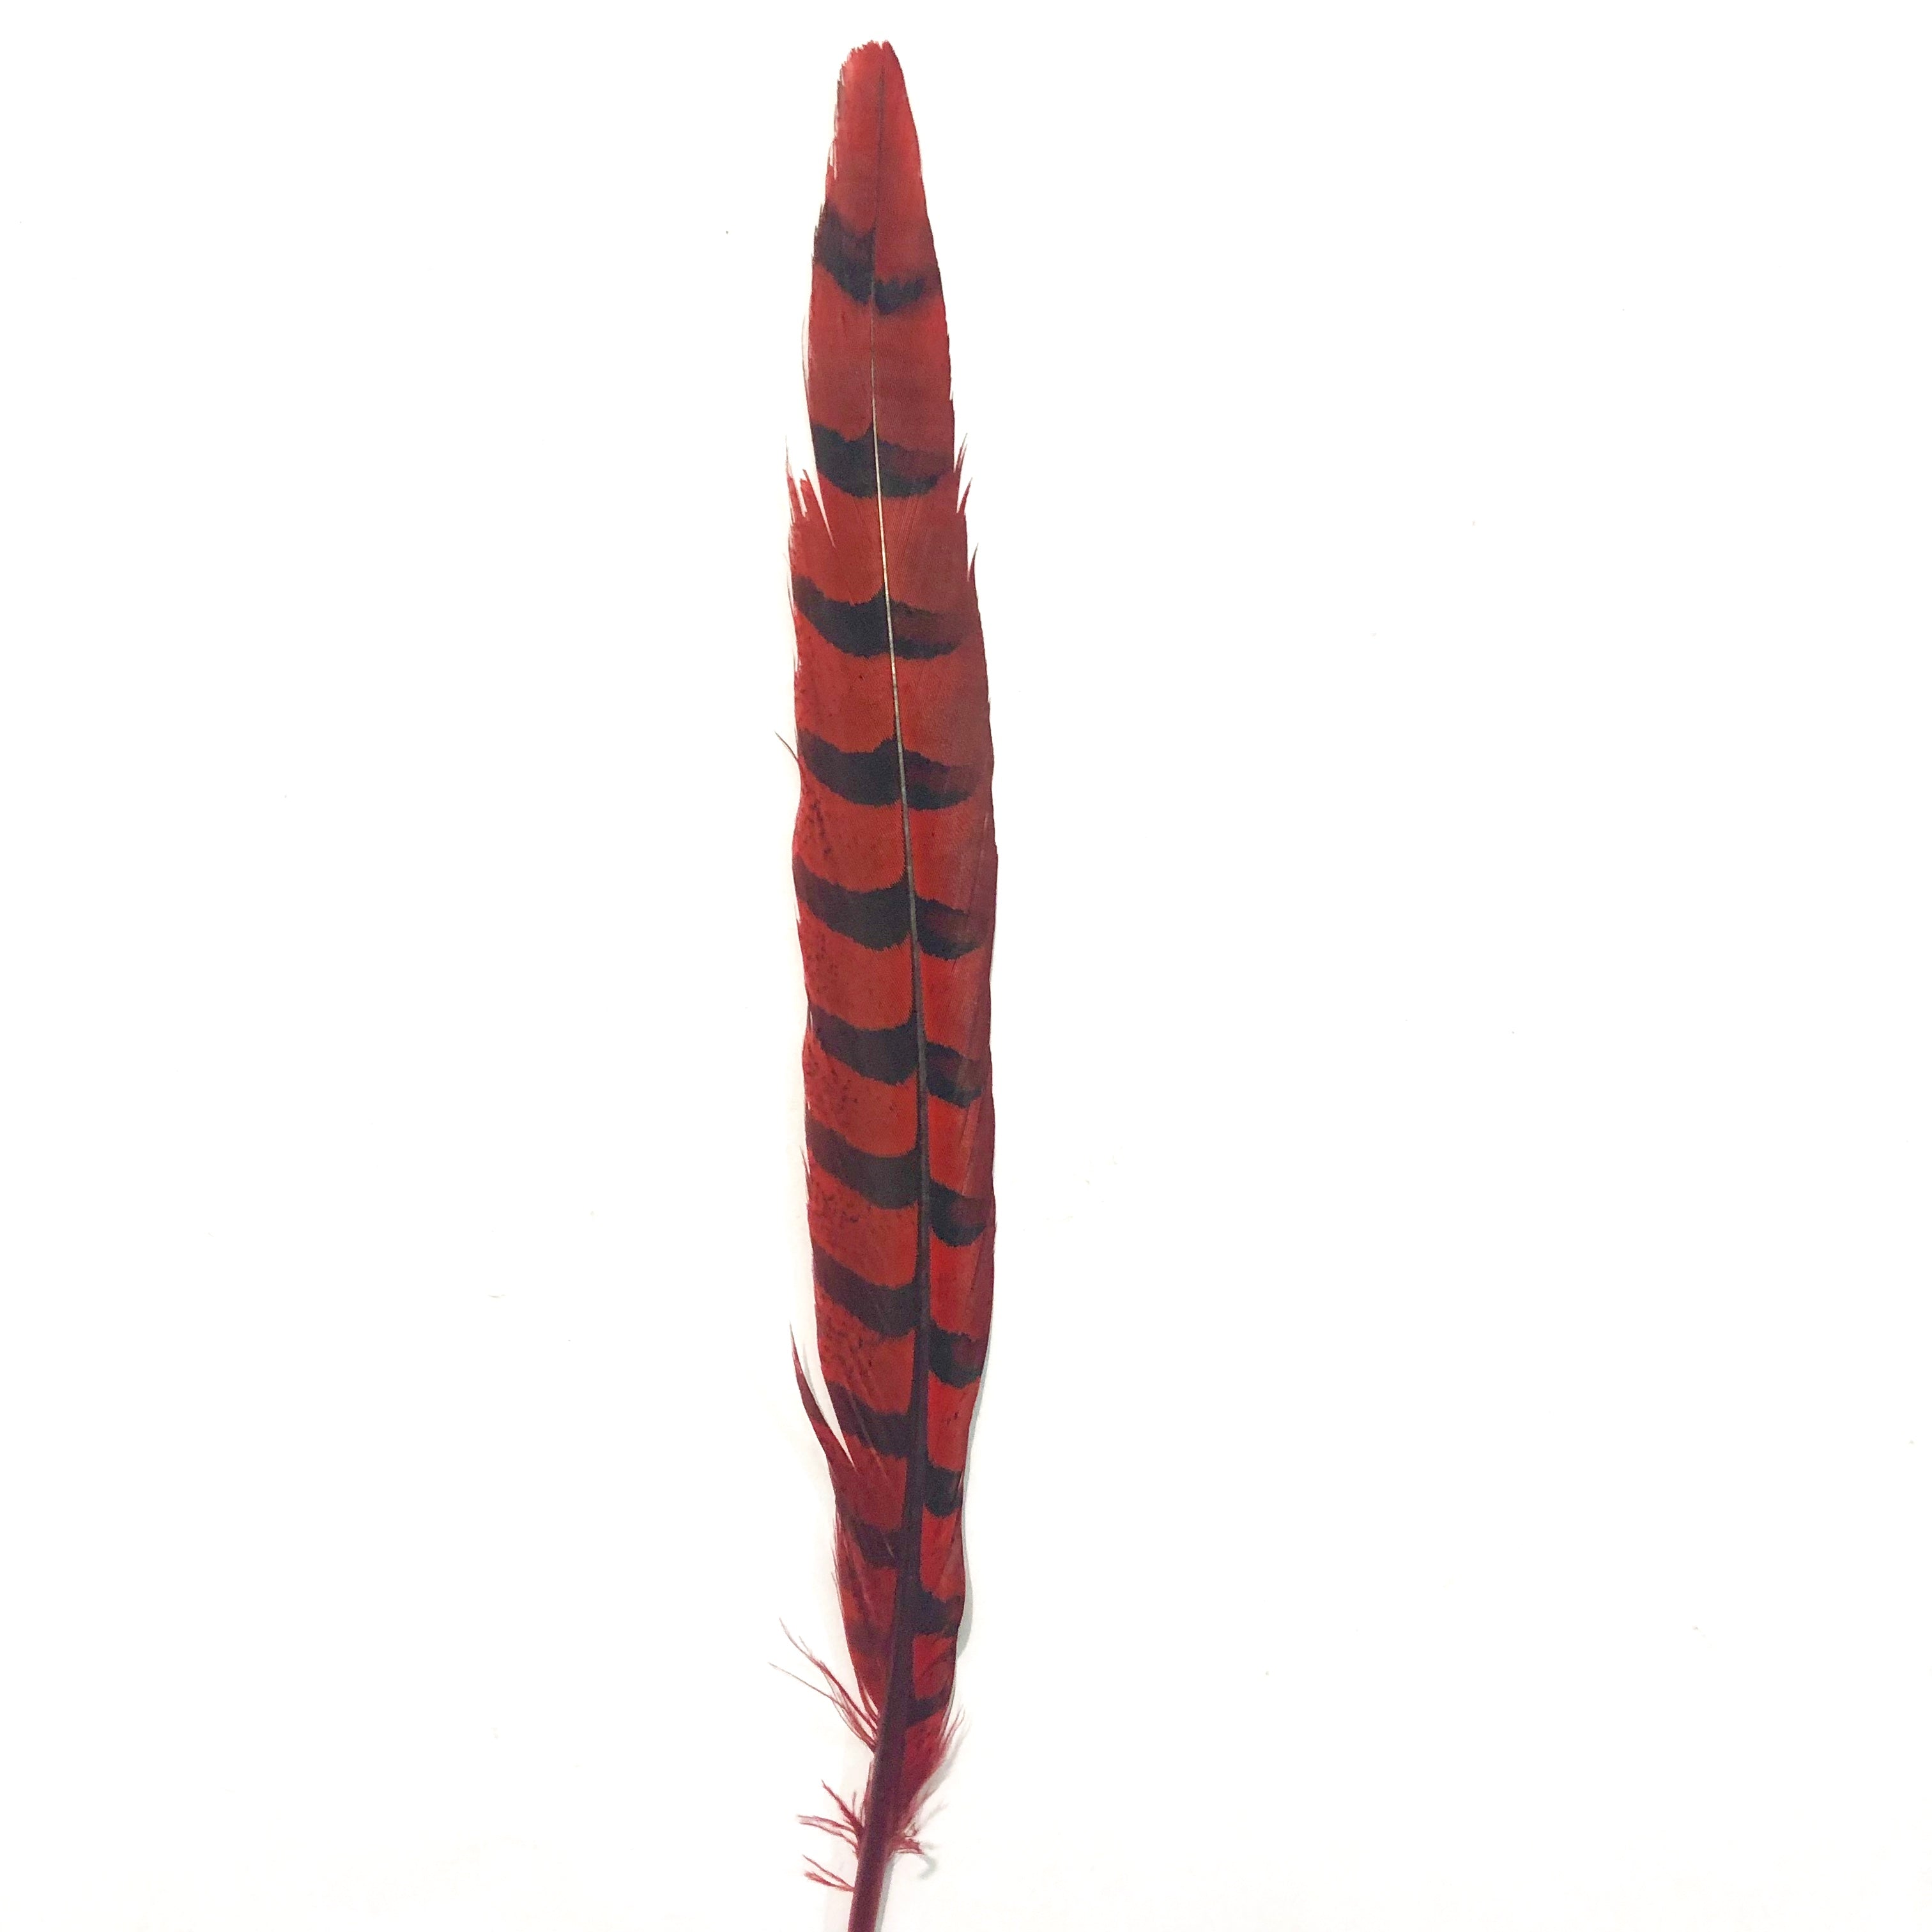 12" to 14" Reeves Pheasant Tail Feather - Red